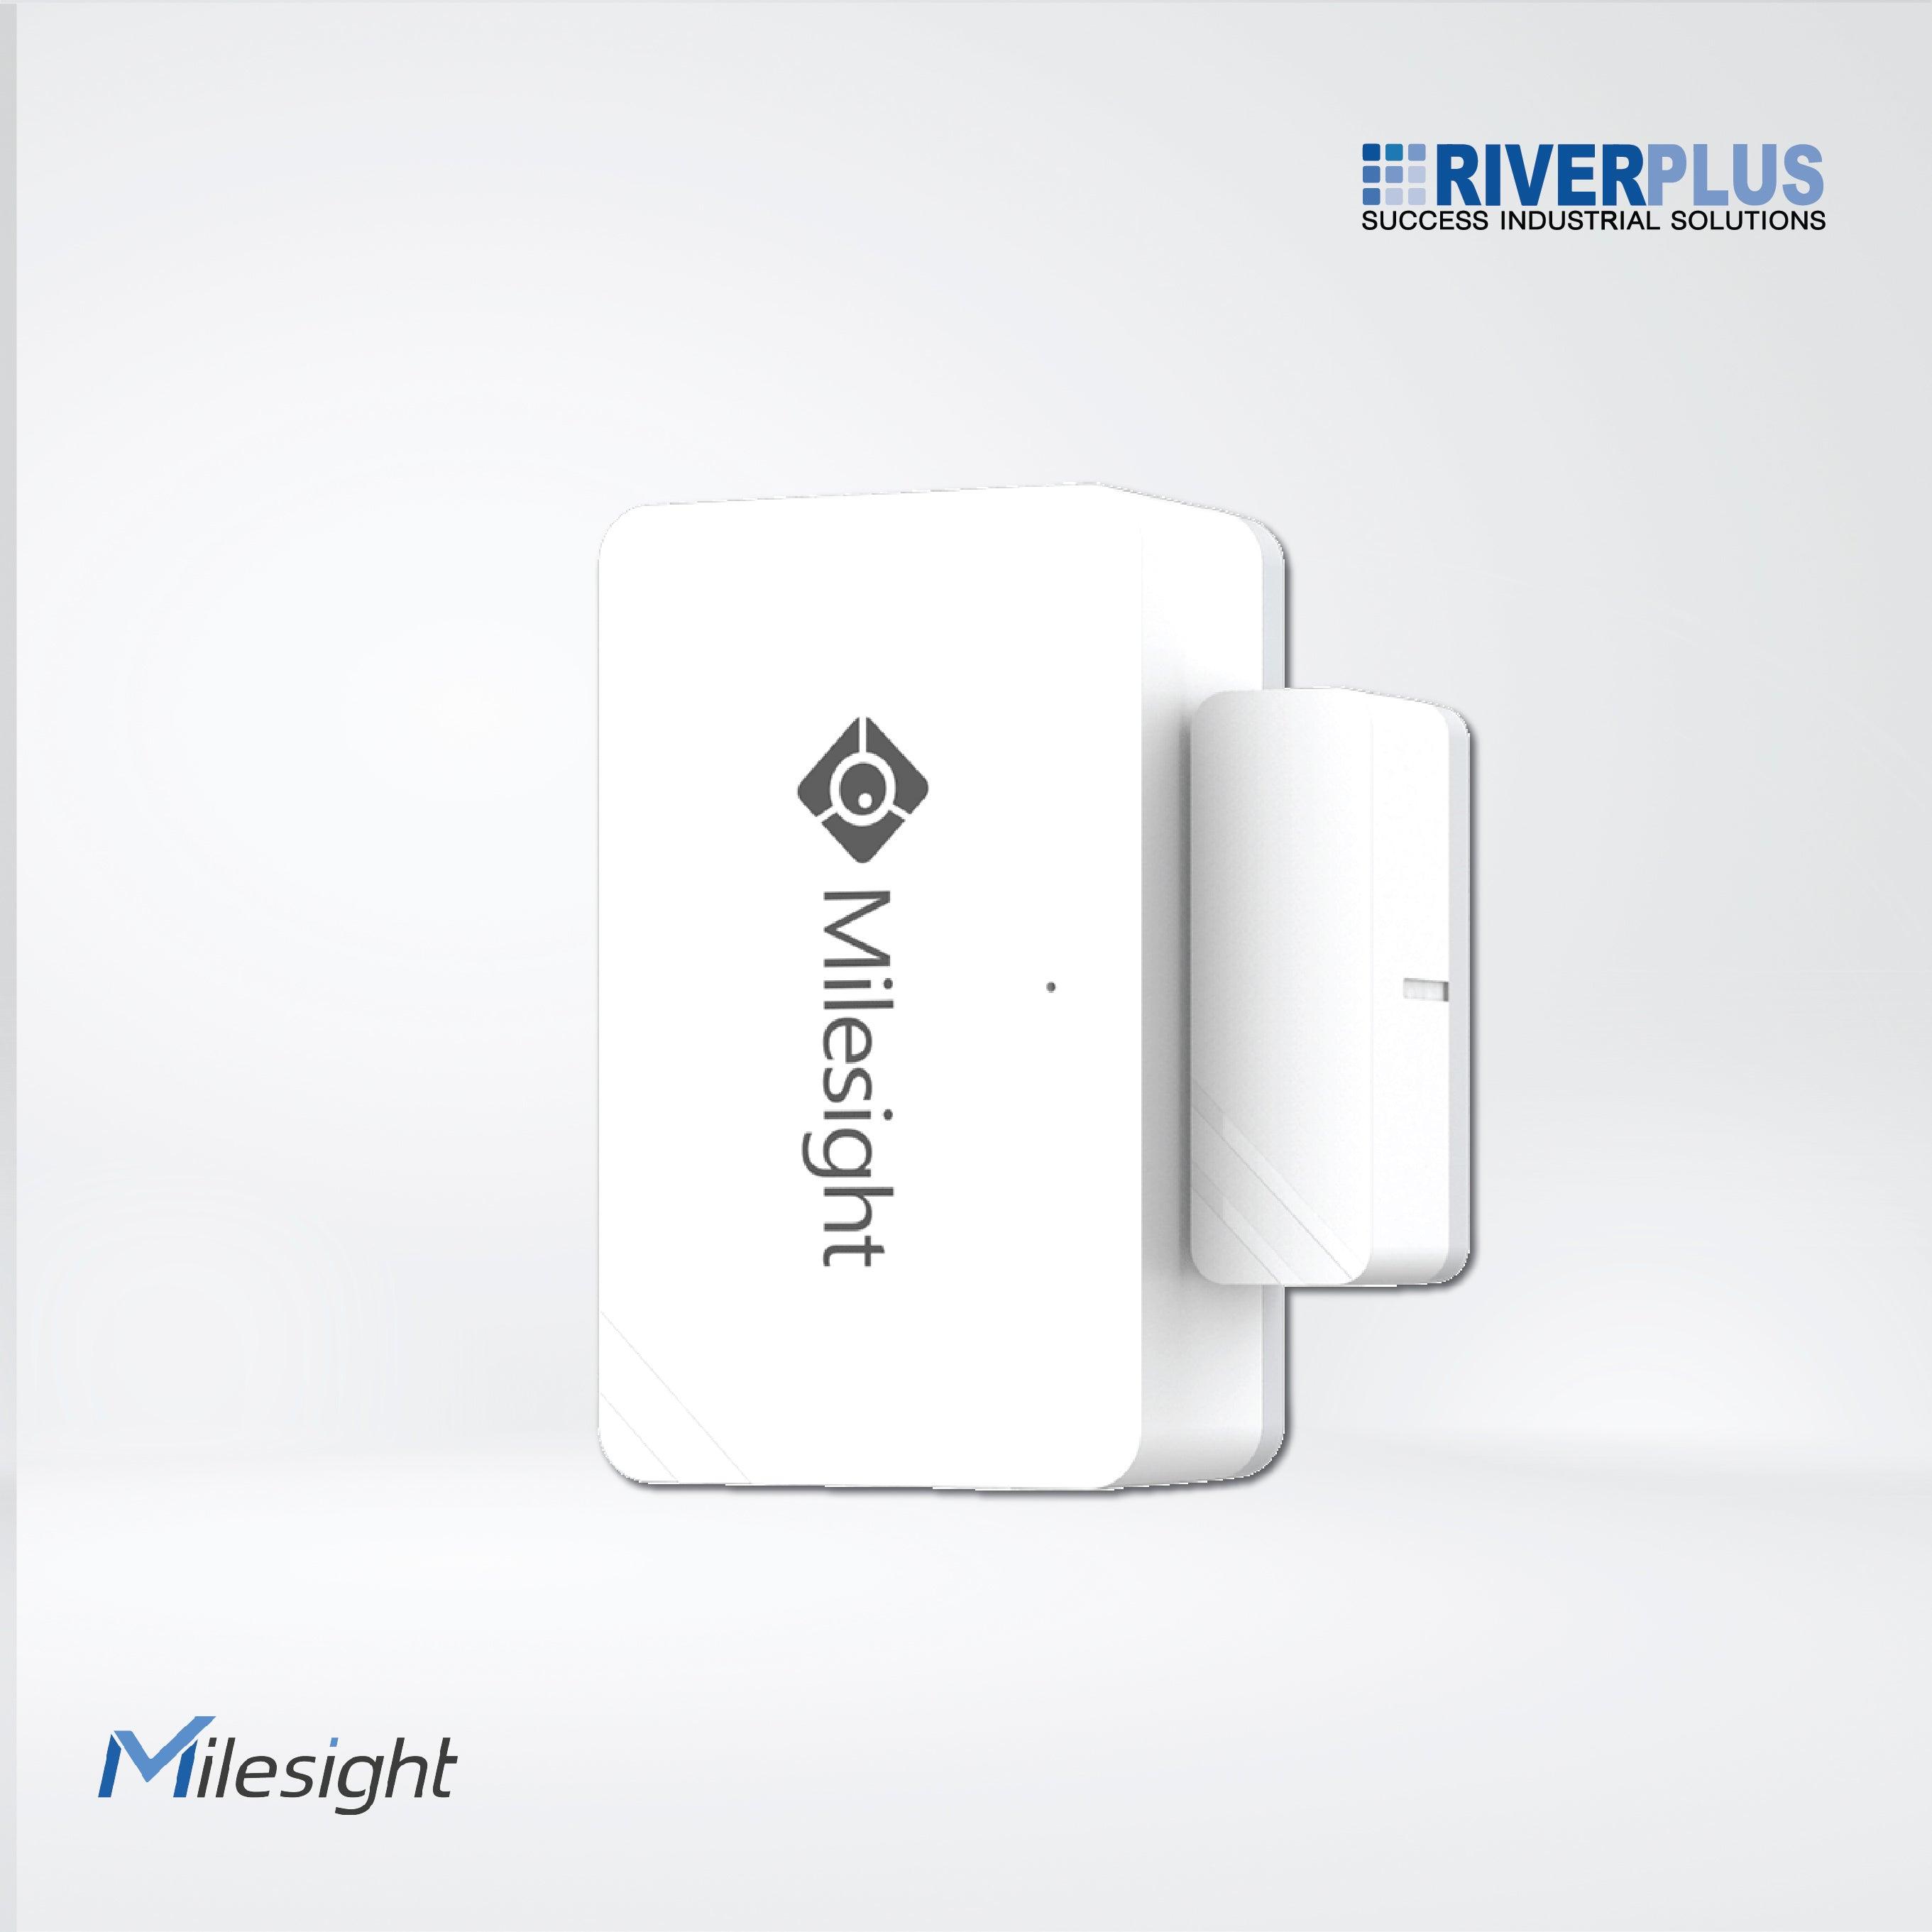 WS301 Magnetic Contact Switch - Riverplus